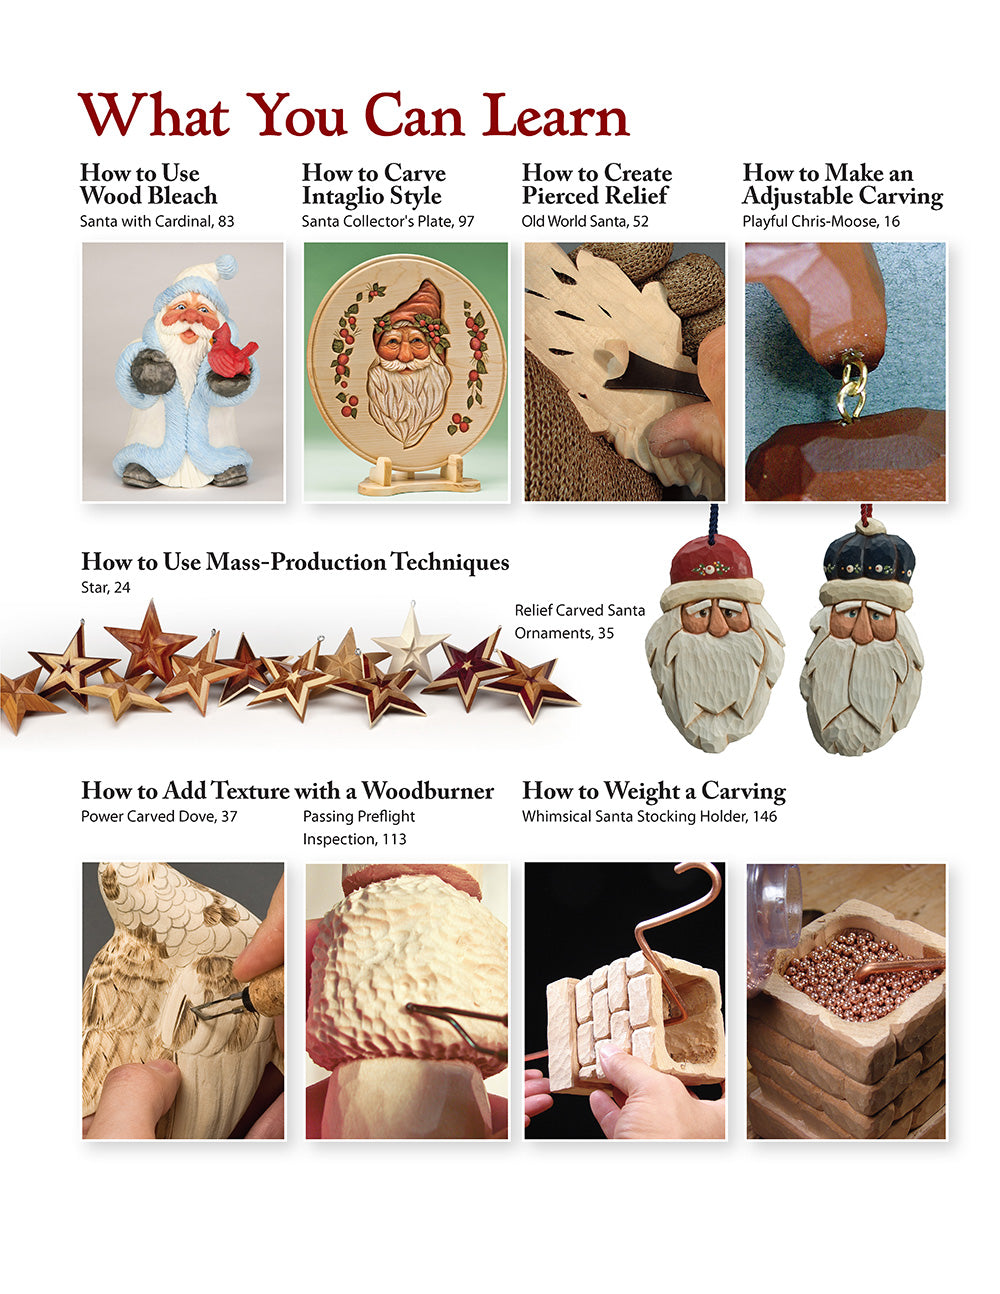 Handcarved Christmas, Updated Second Edition